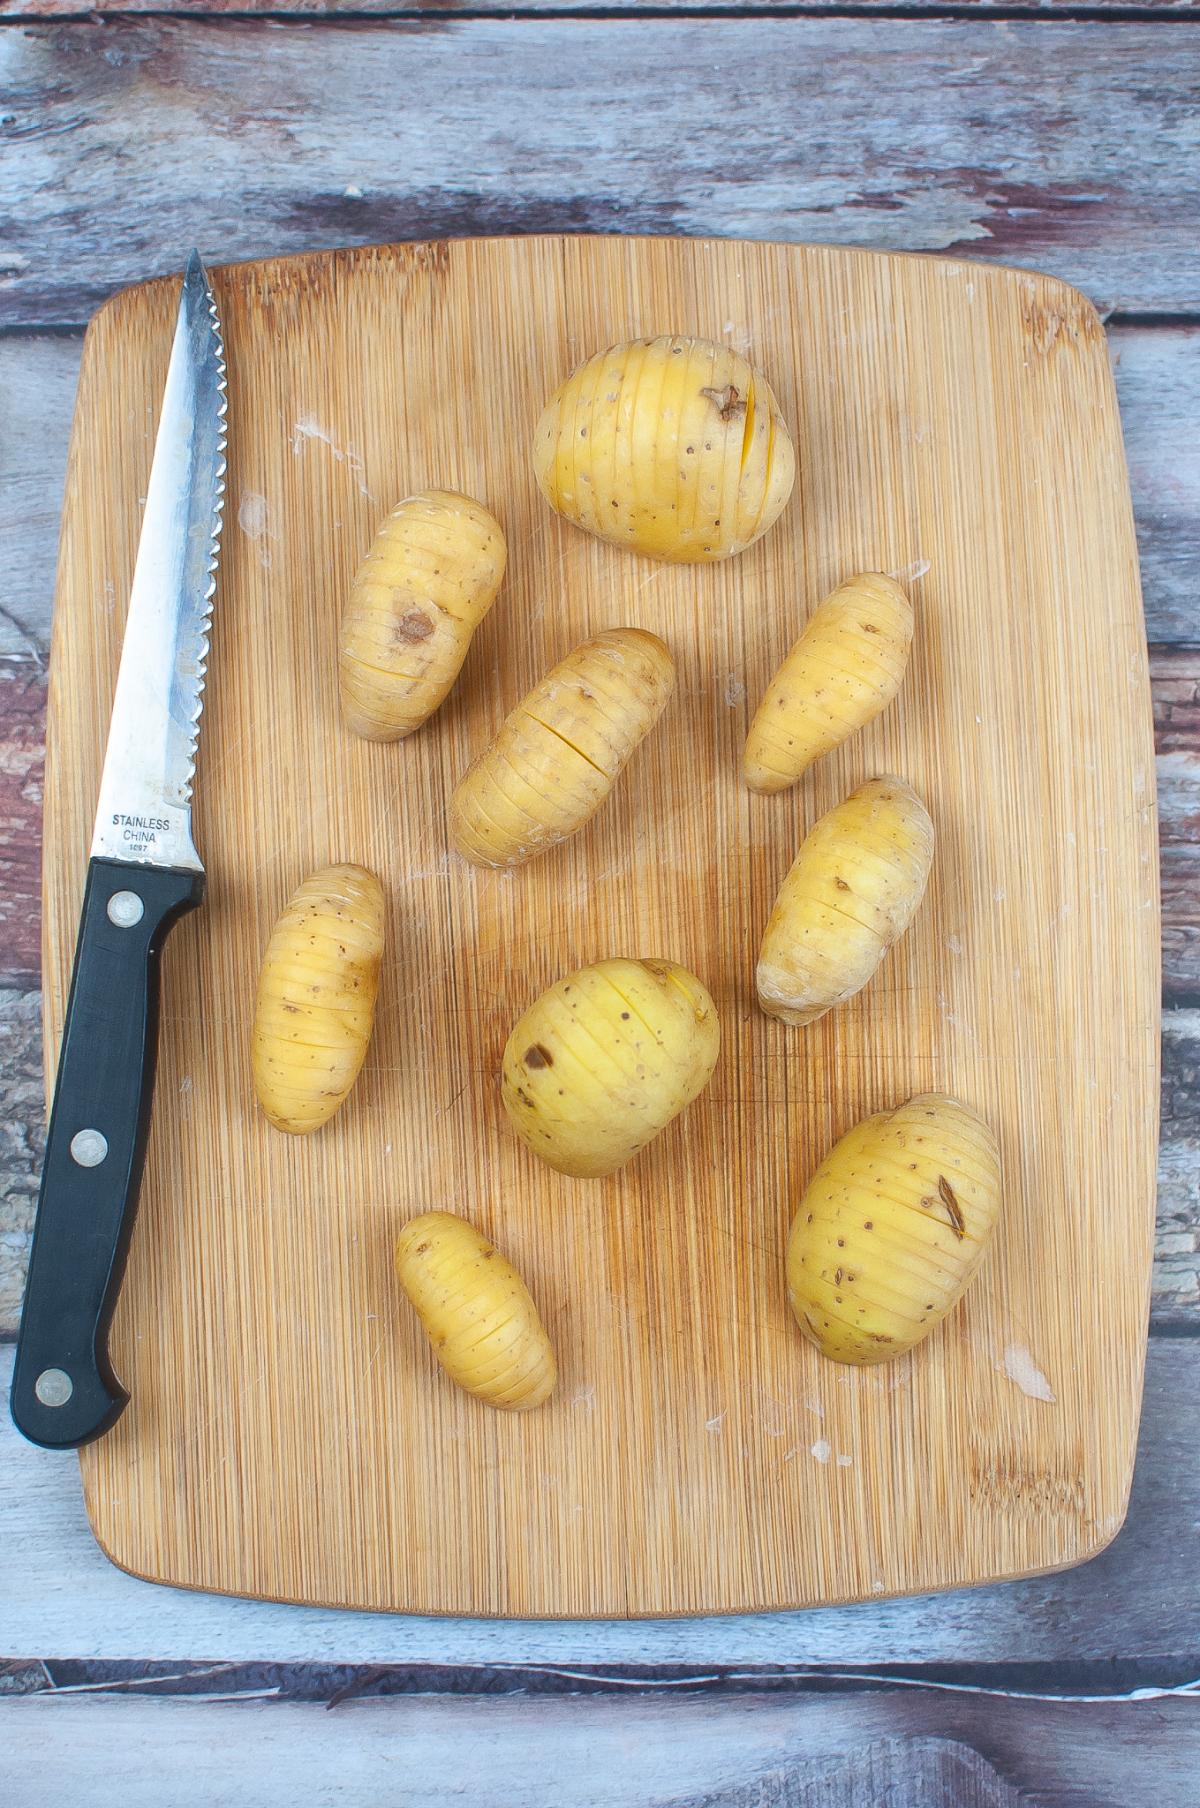 Potatoes on a cutting board with a knife.